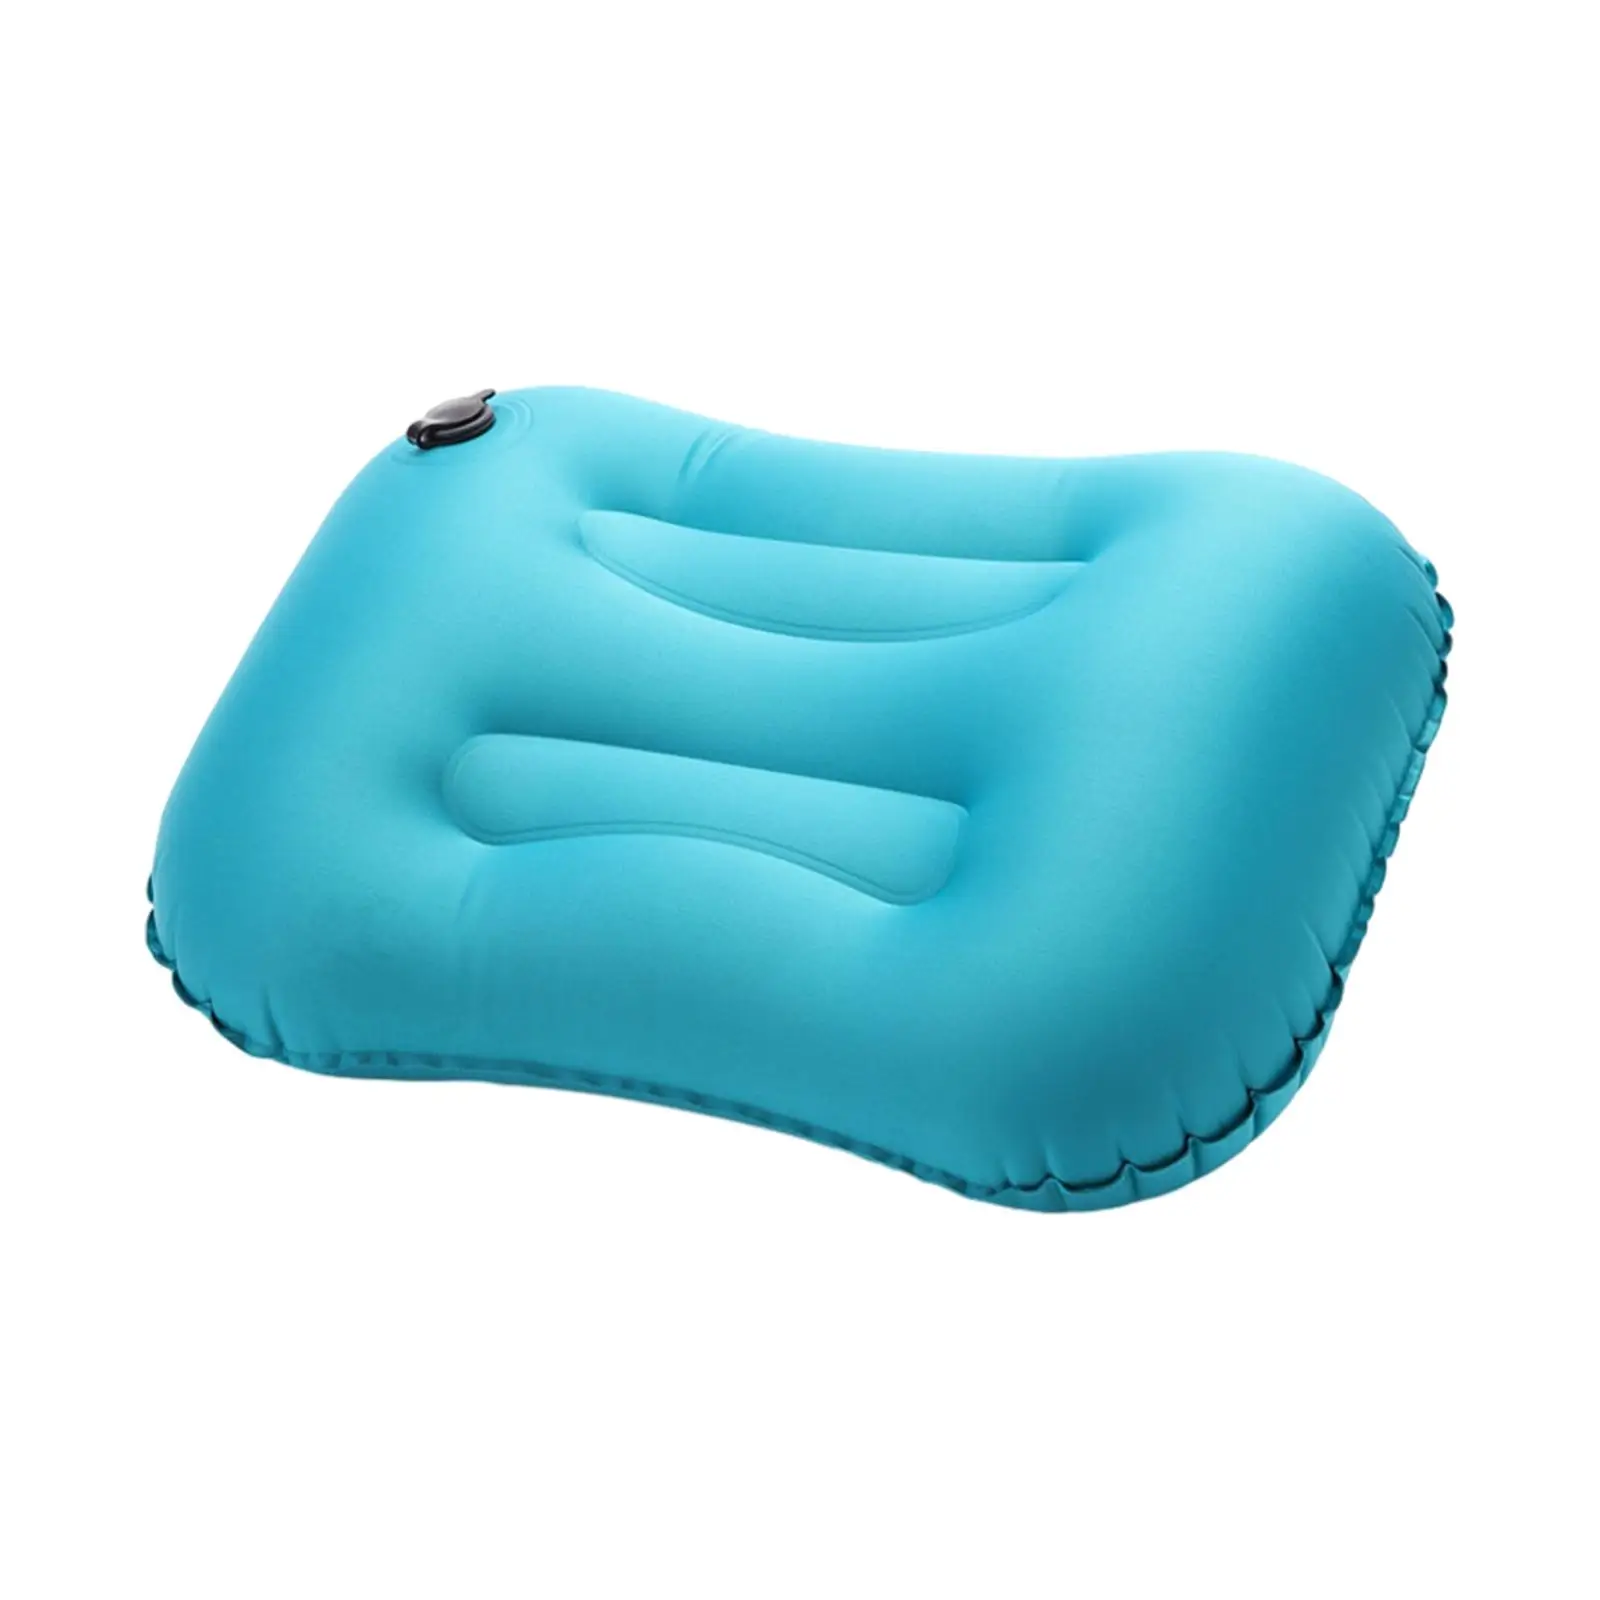 Inflatable Camping Pillow Compressible Pillow for Beach Hiking Nap Rest